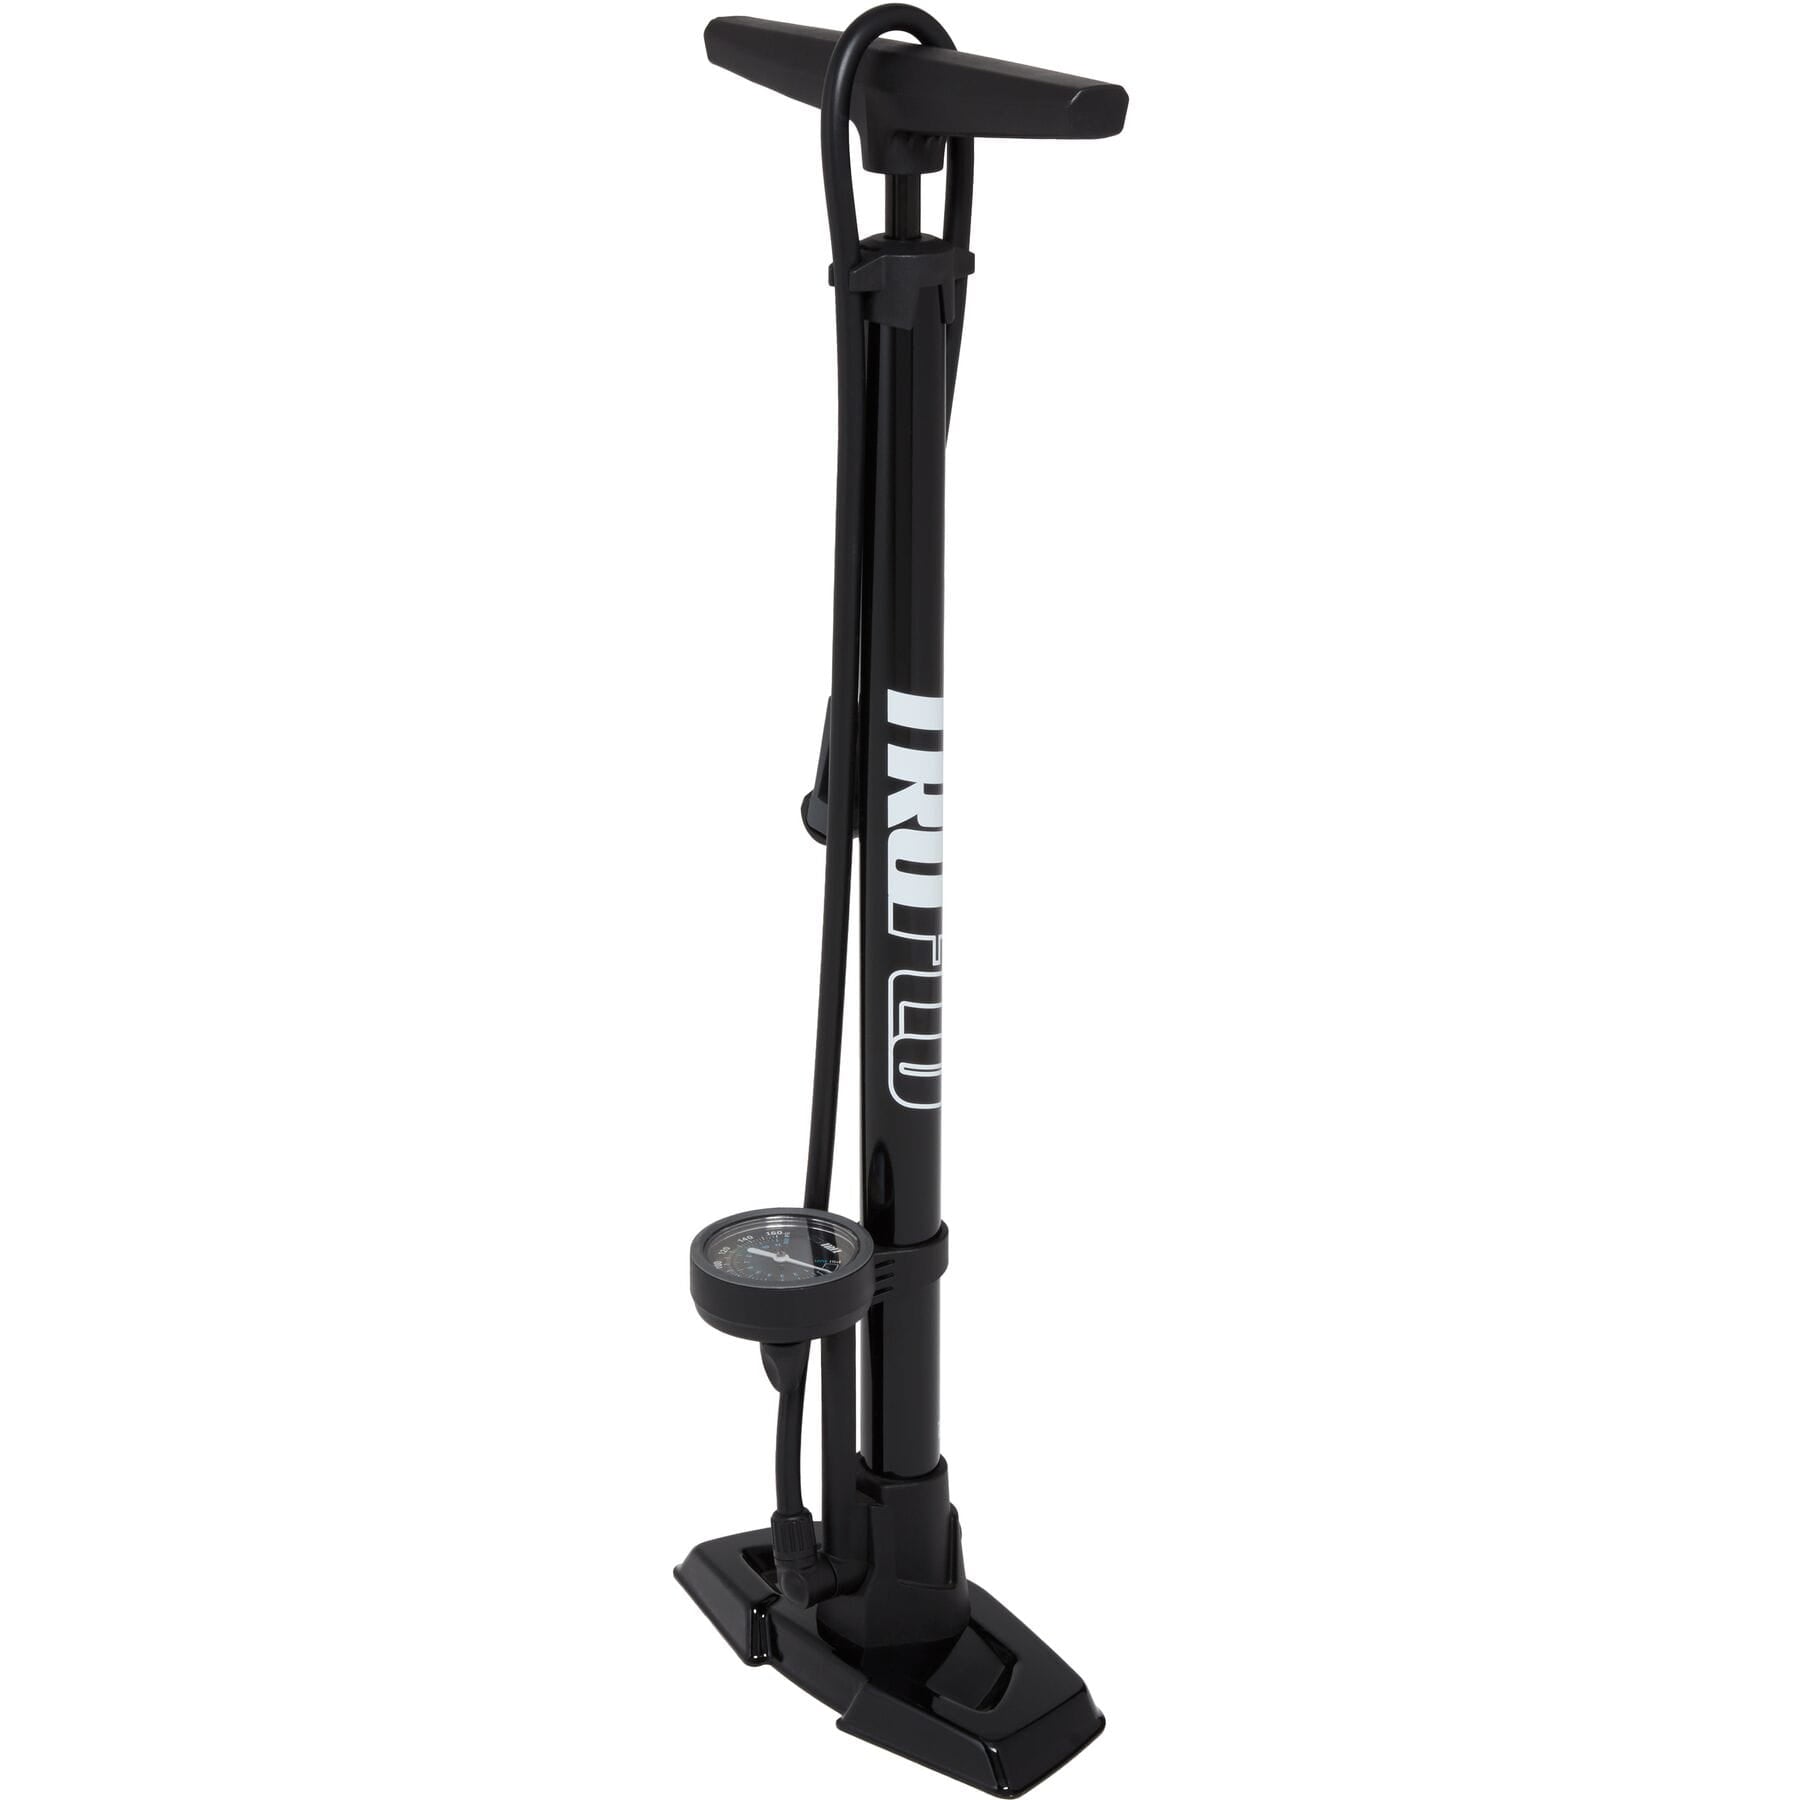 Easitrax 4 black floor pump positioned against a white background